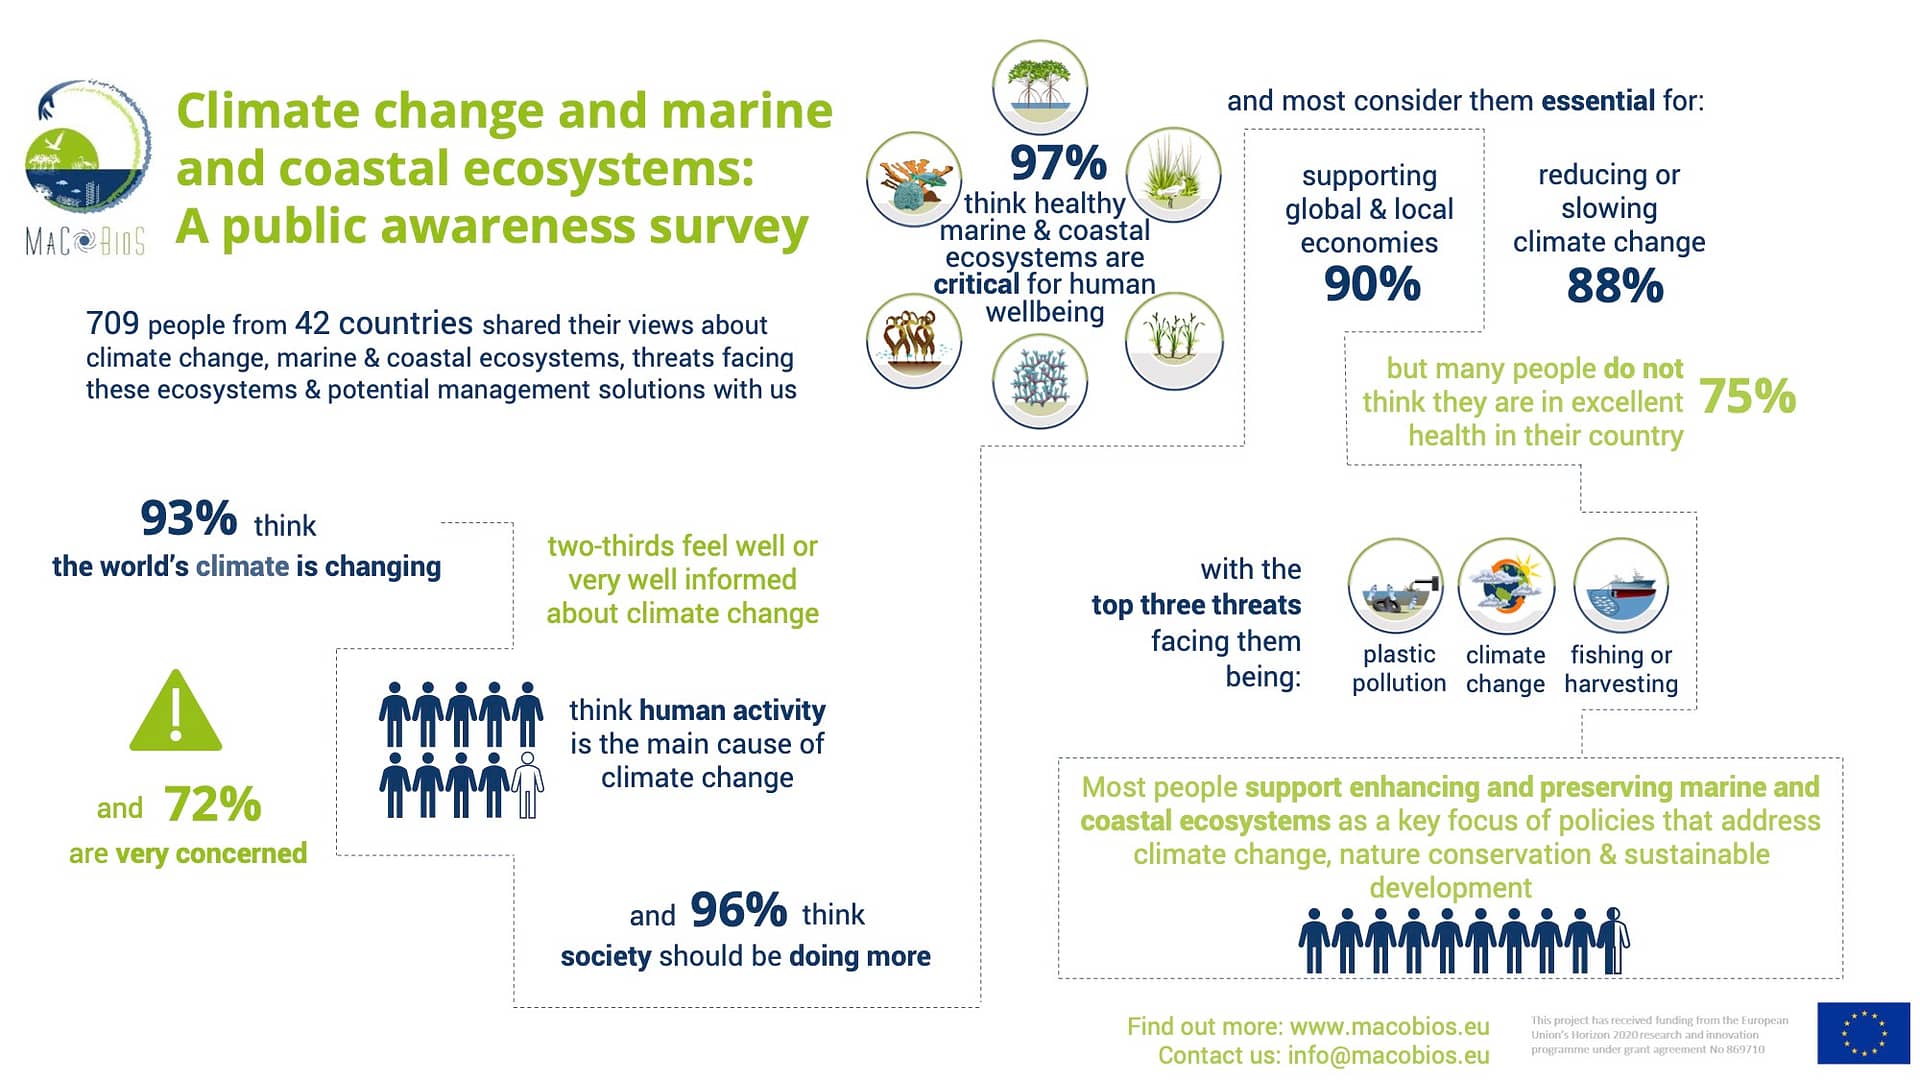 Developing a deeper understanding of public awareness of climate change, human impacts and the value and management of marine and coastal ecosystems